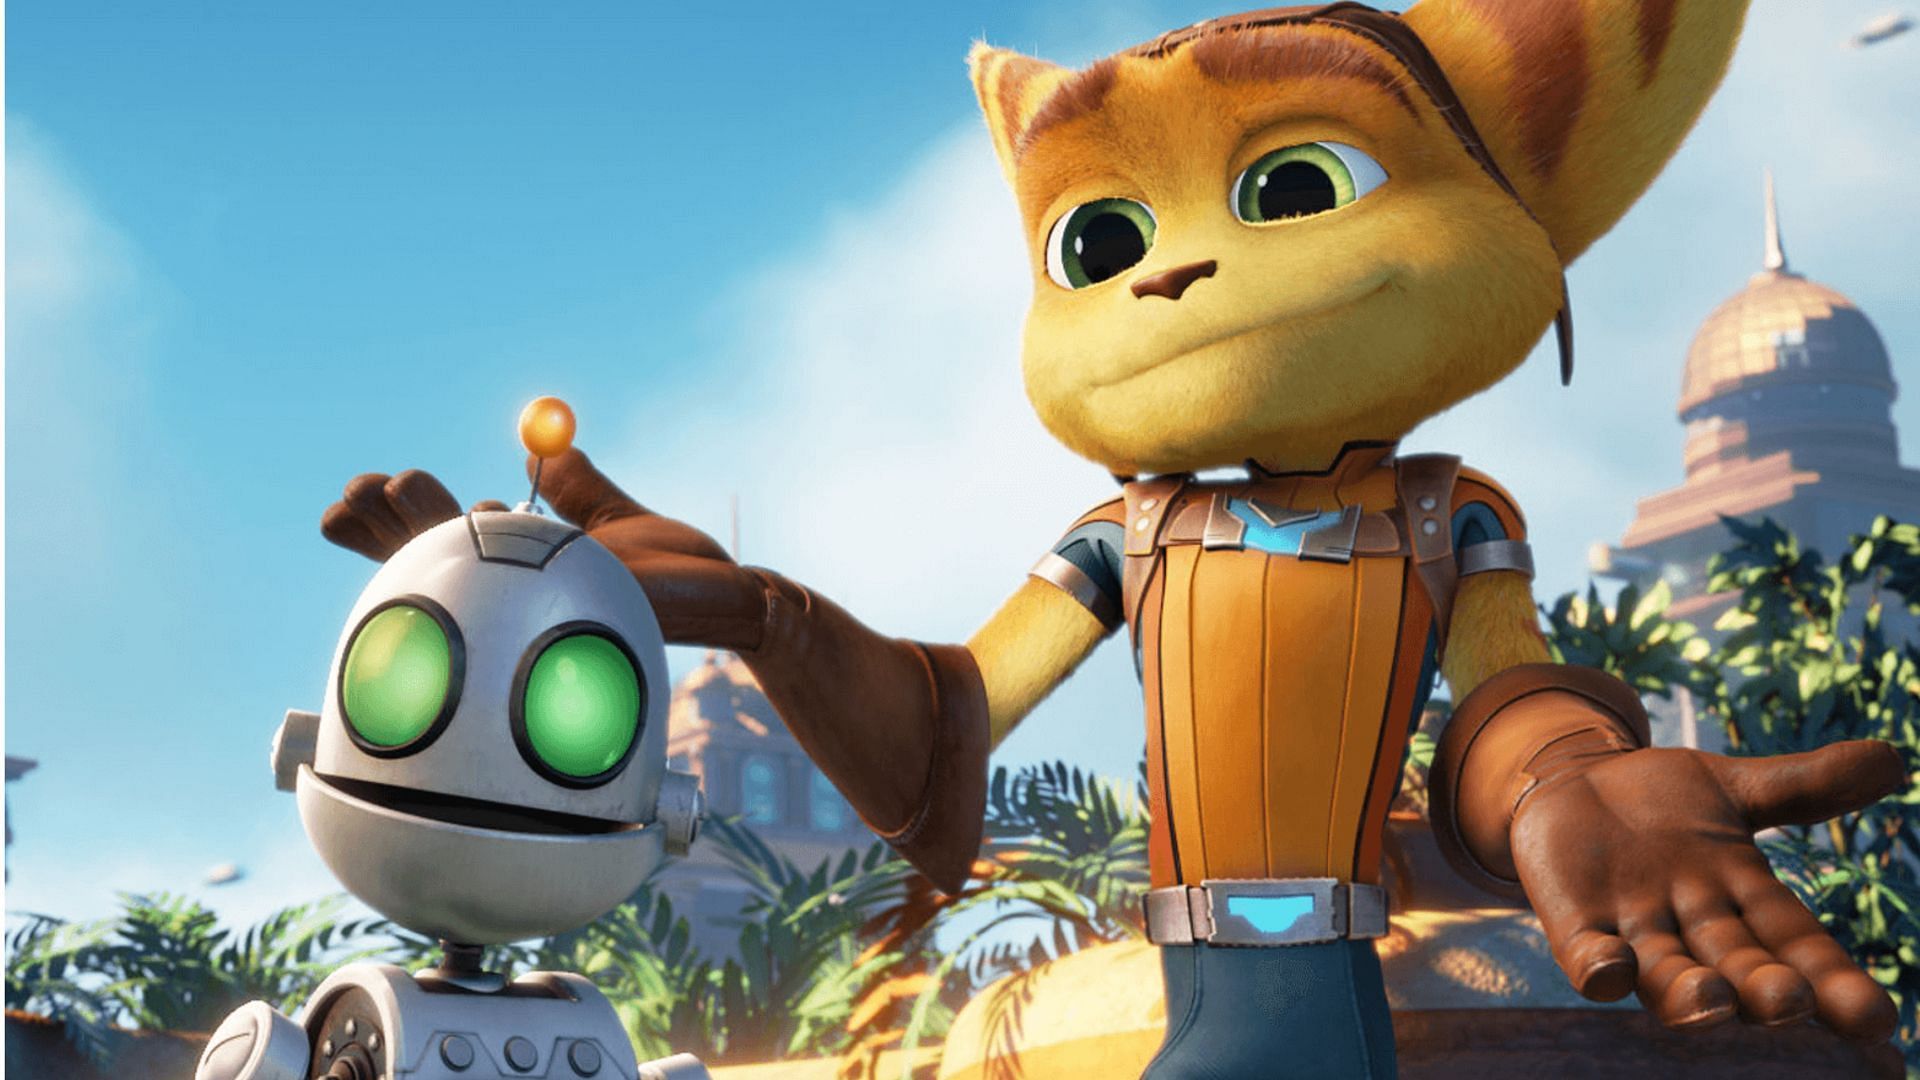 Ratchet and Clank began their journey in 2002 (Image via Insomniac Games)